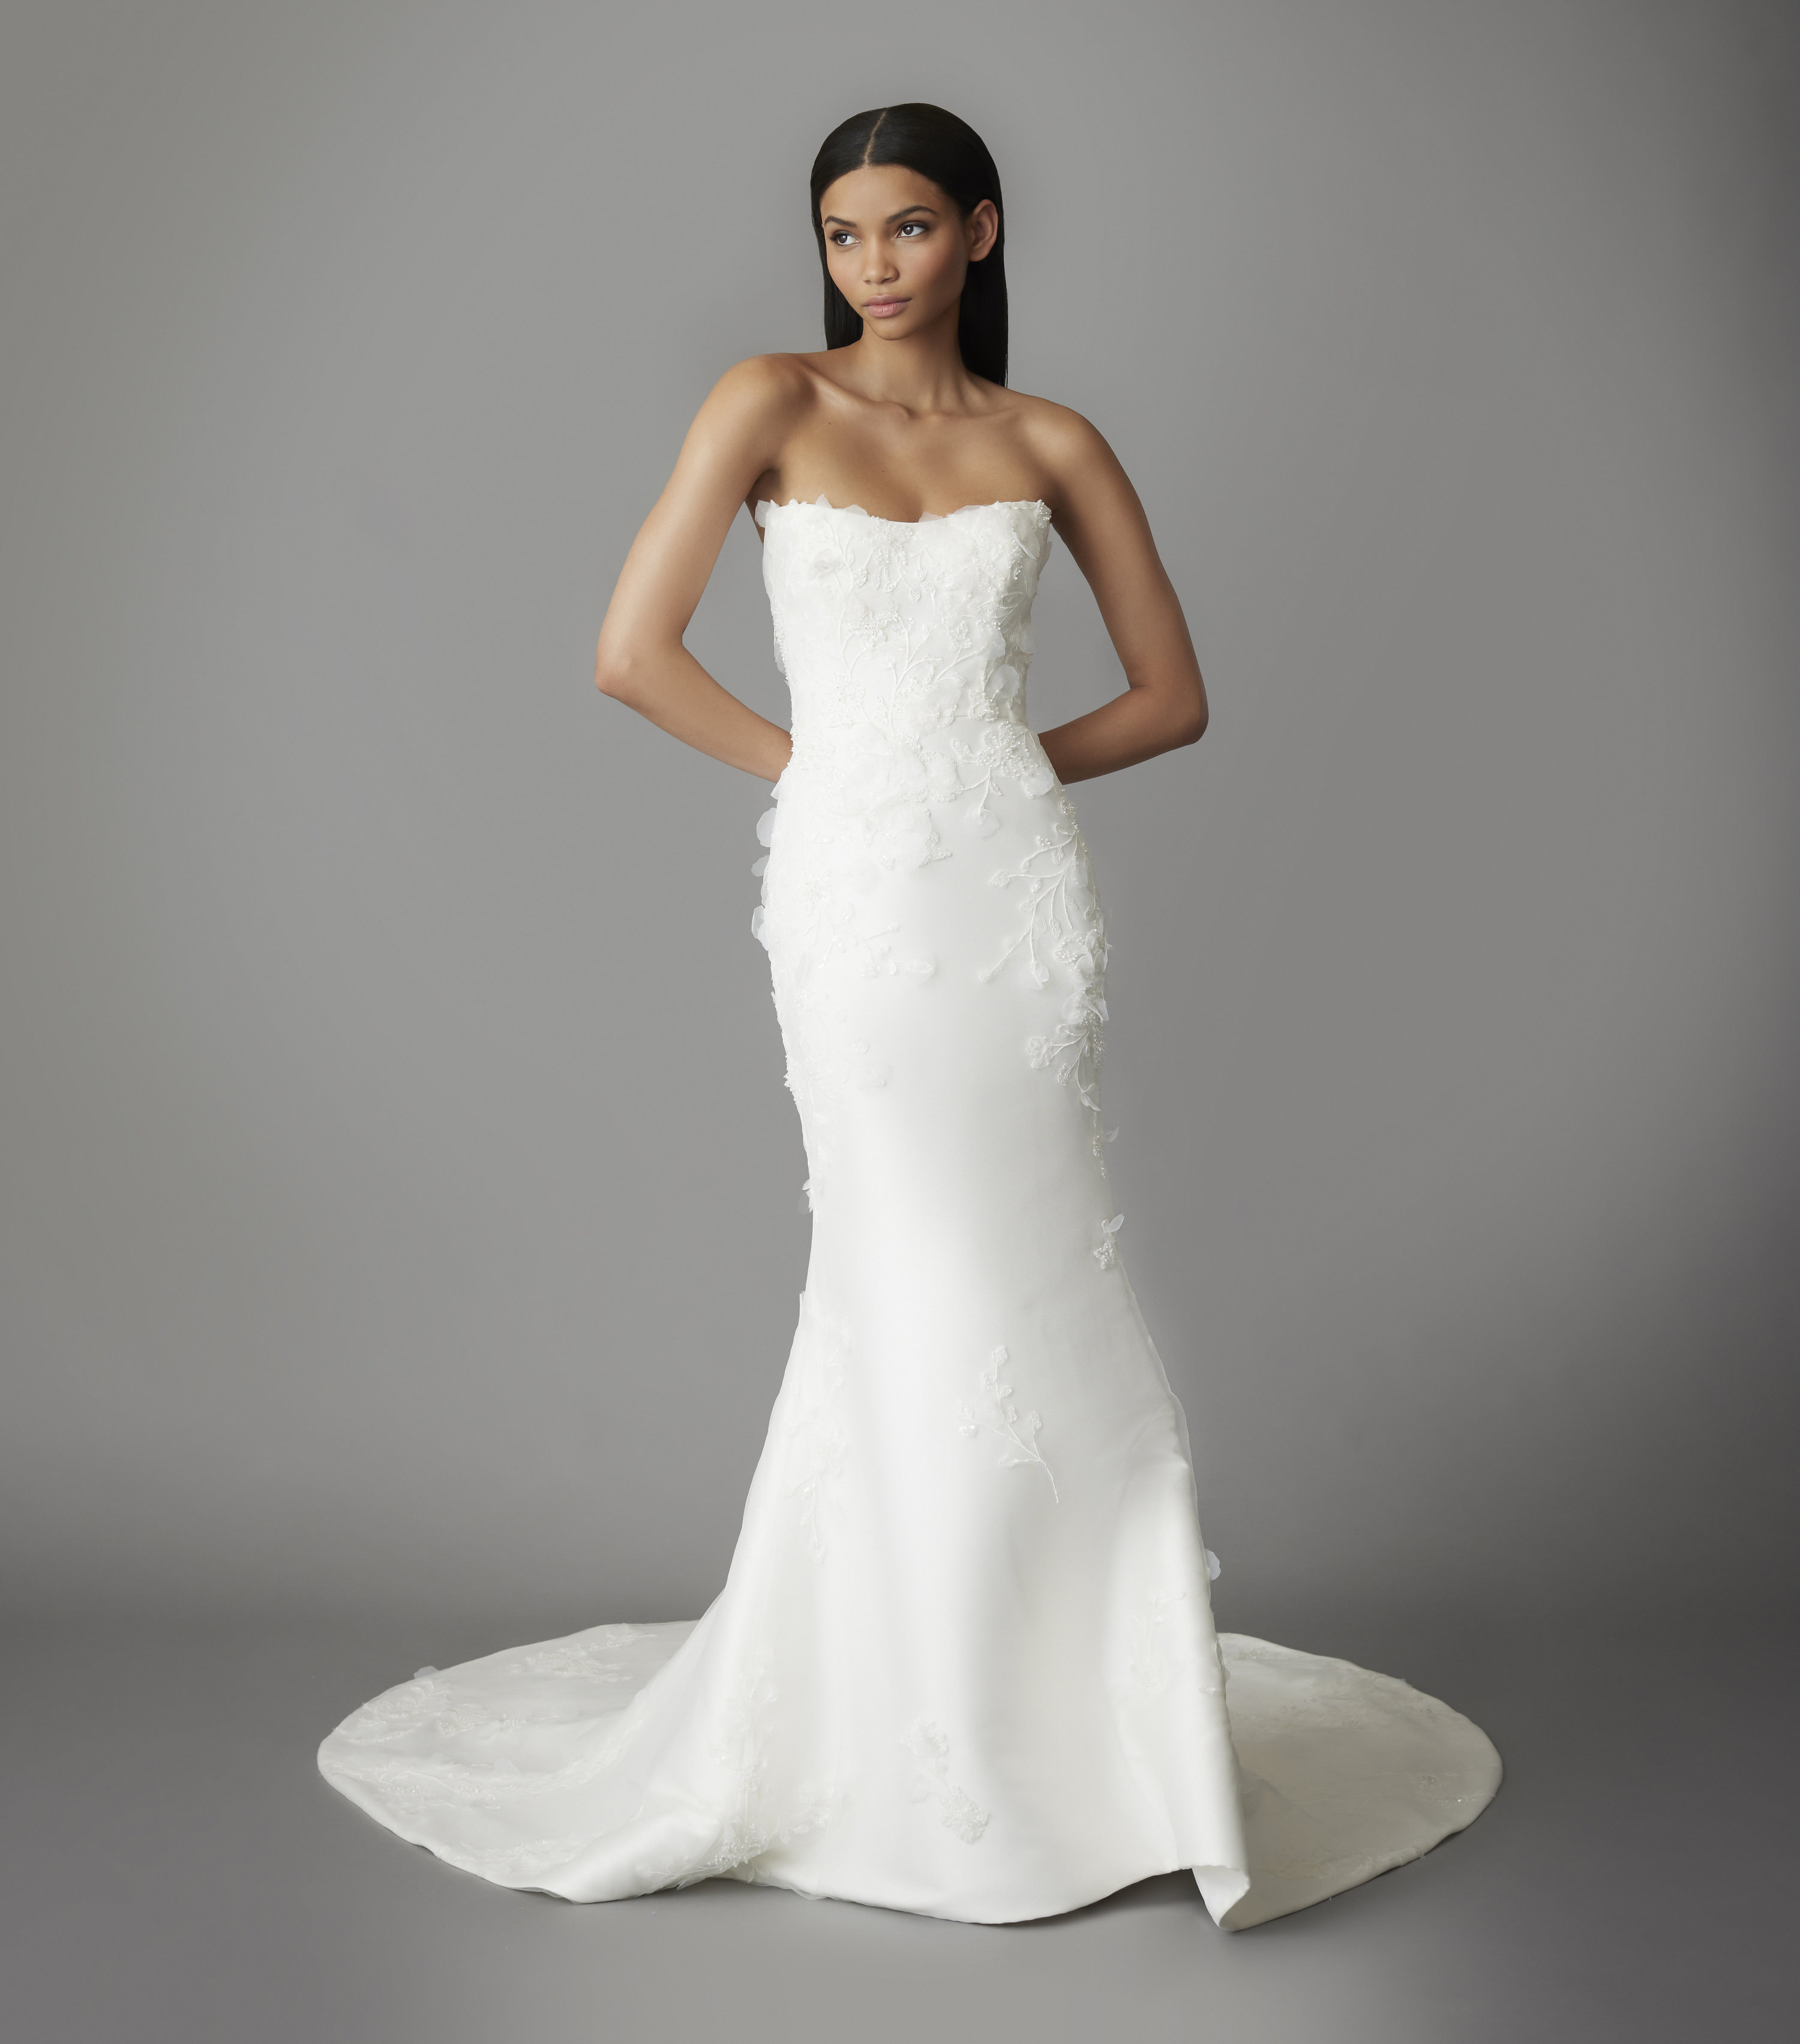 The Atelier Couture - Stylish Wedding, Bridal Dress, & Gowns